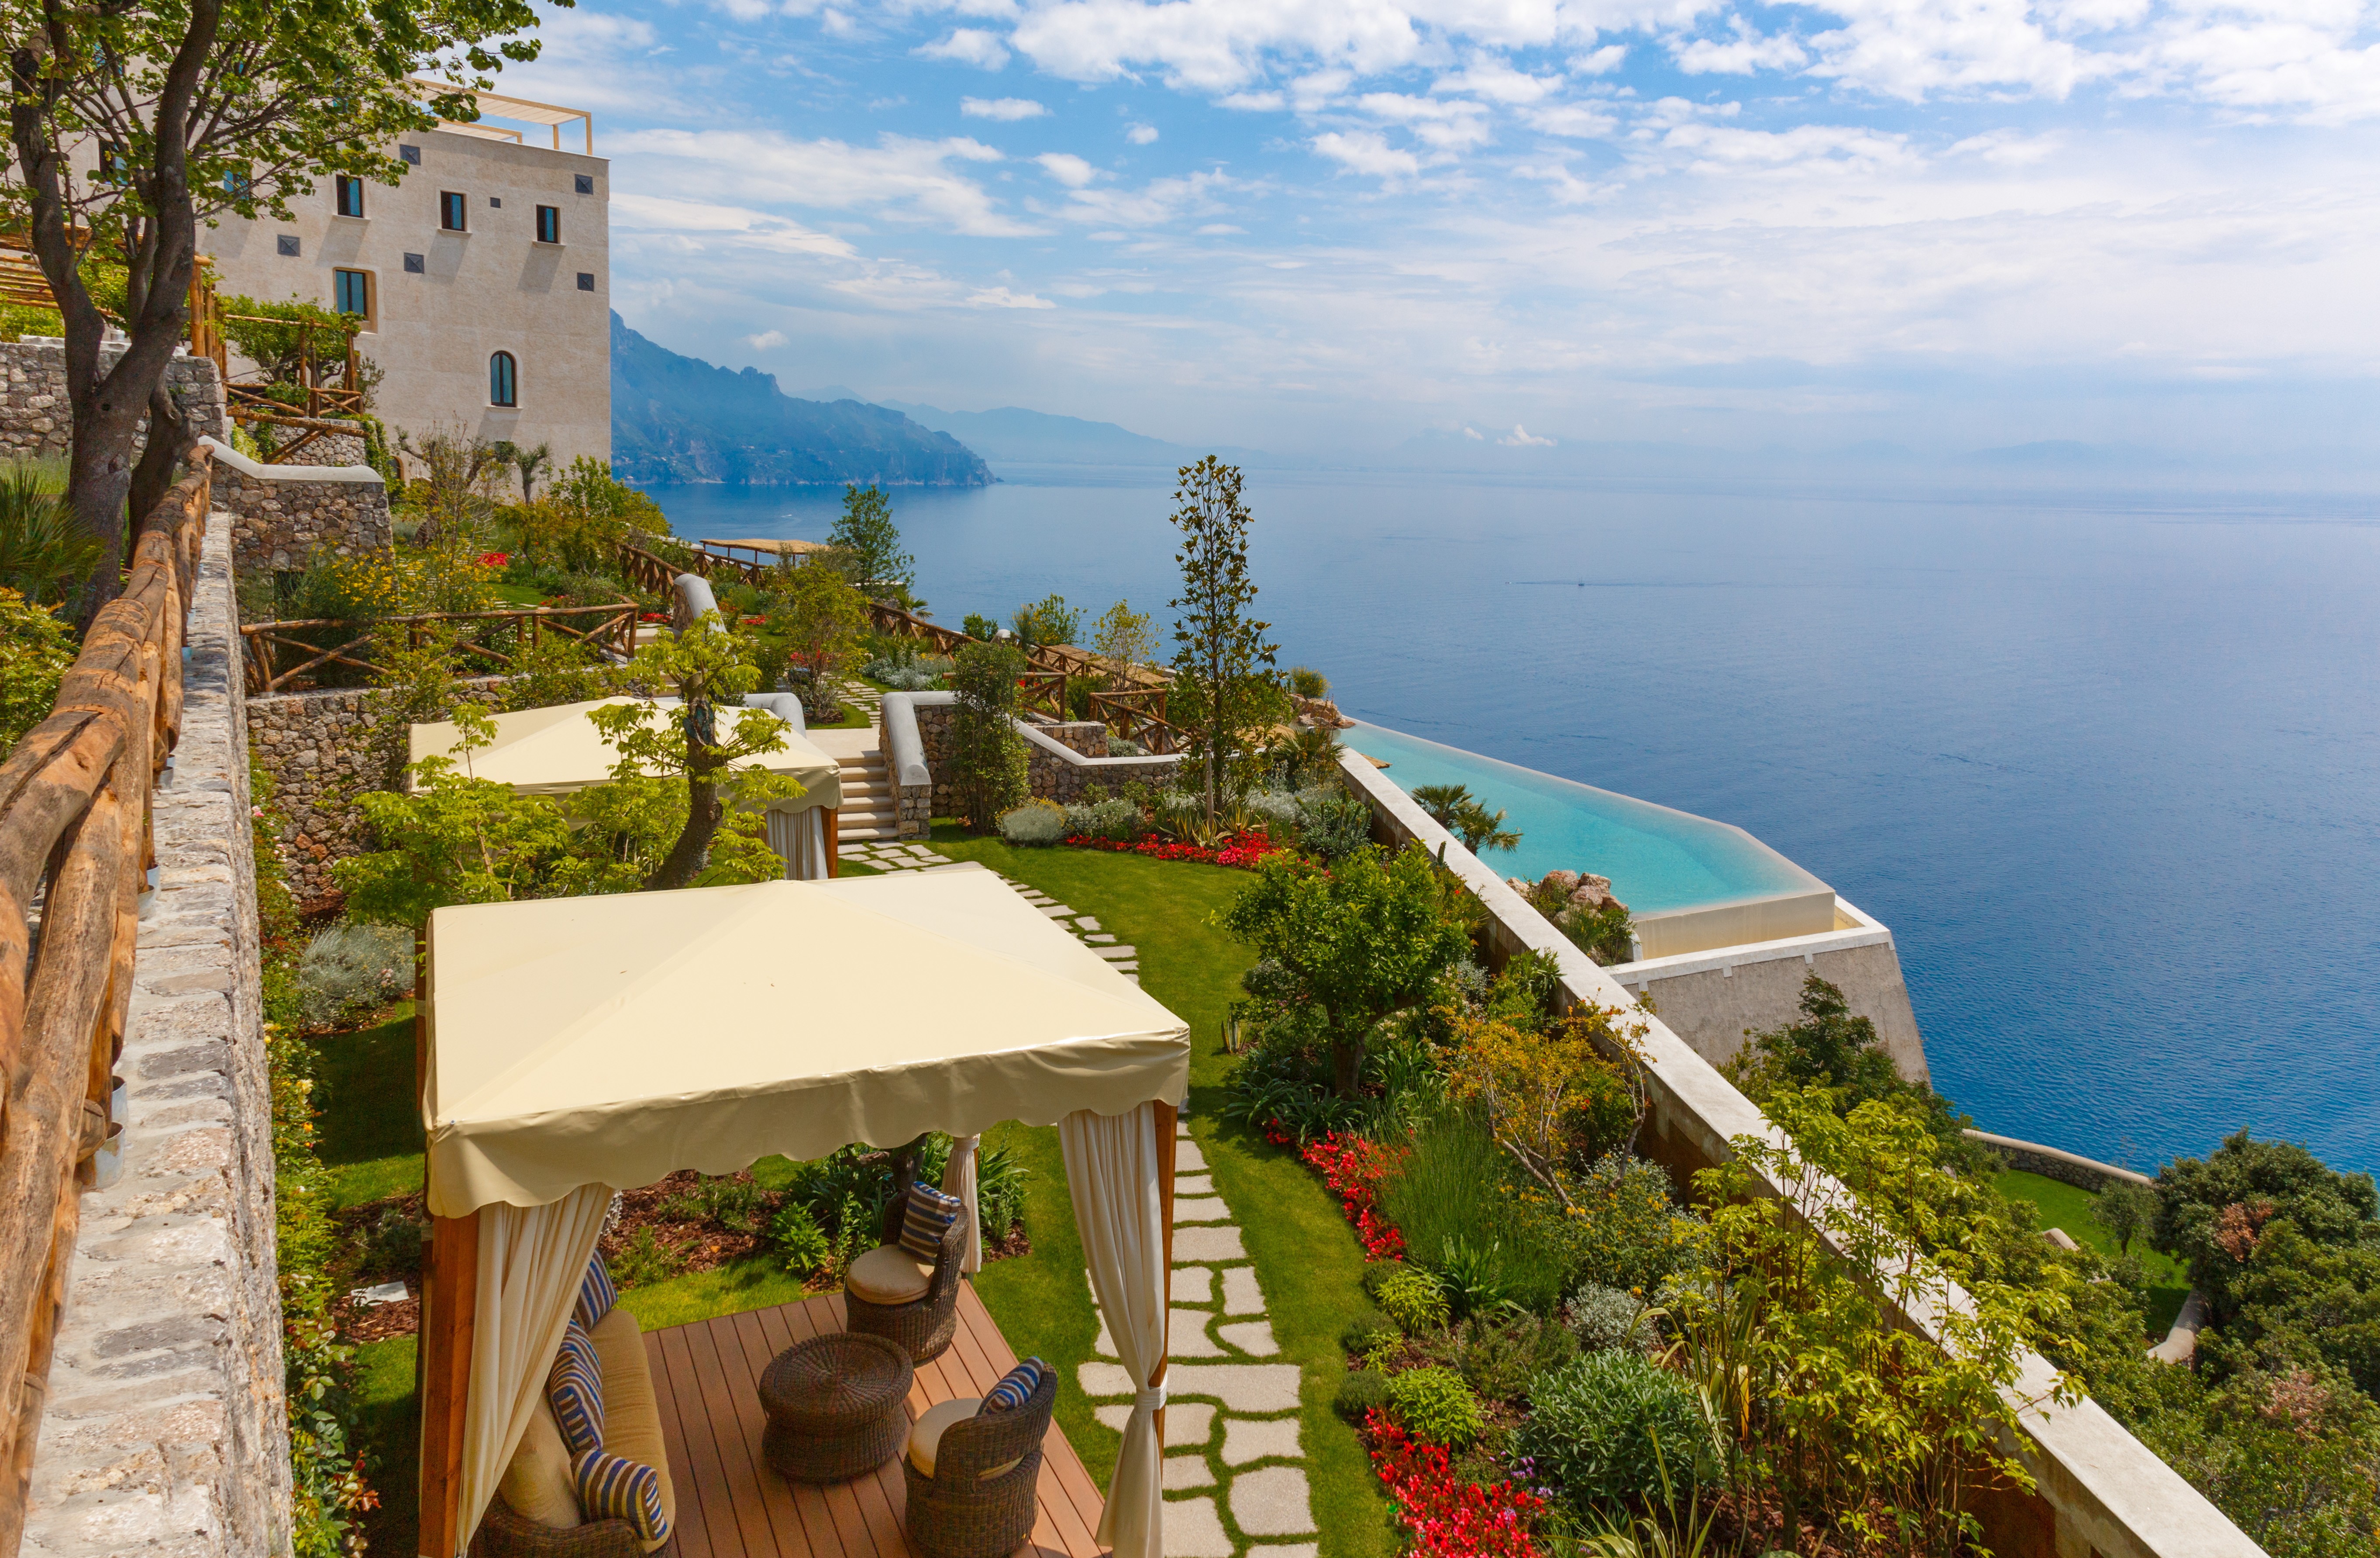 Ditch the heels and prepare for decadence at Monastero Santa Rosa, an adults’ only retreat overhanging a cliff on Italy’s Amalfi Coast. Photos: Handouts